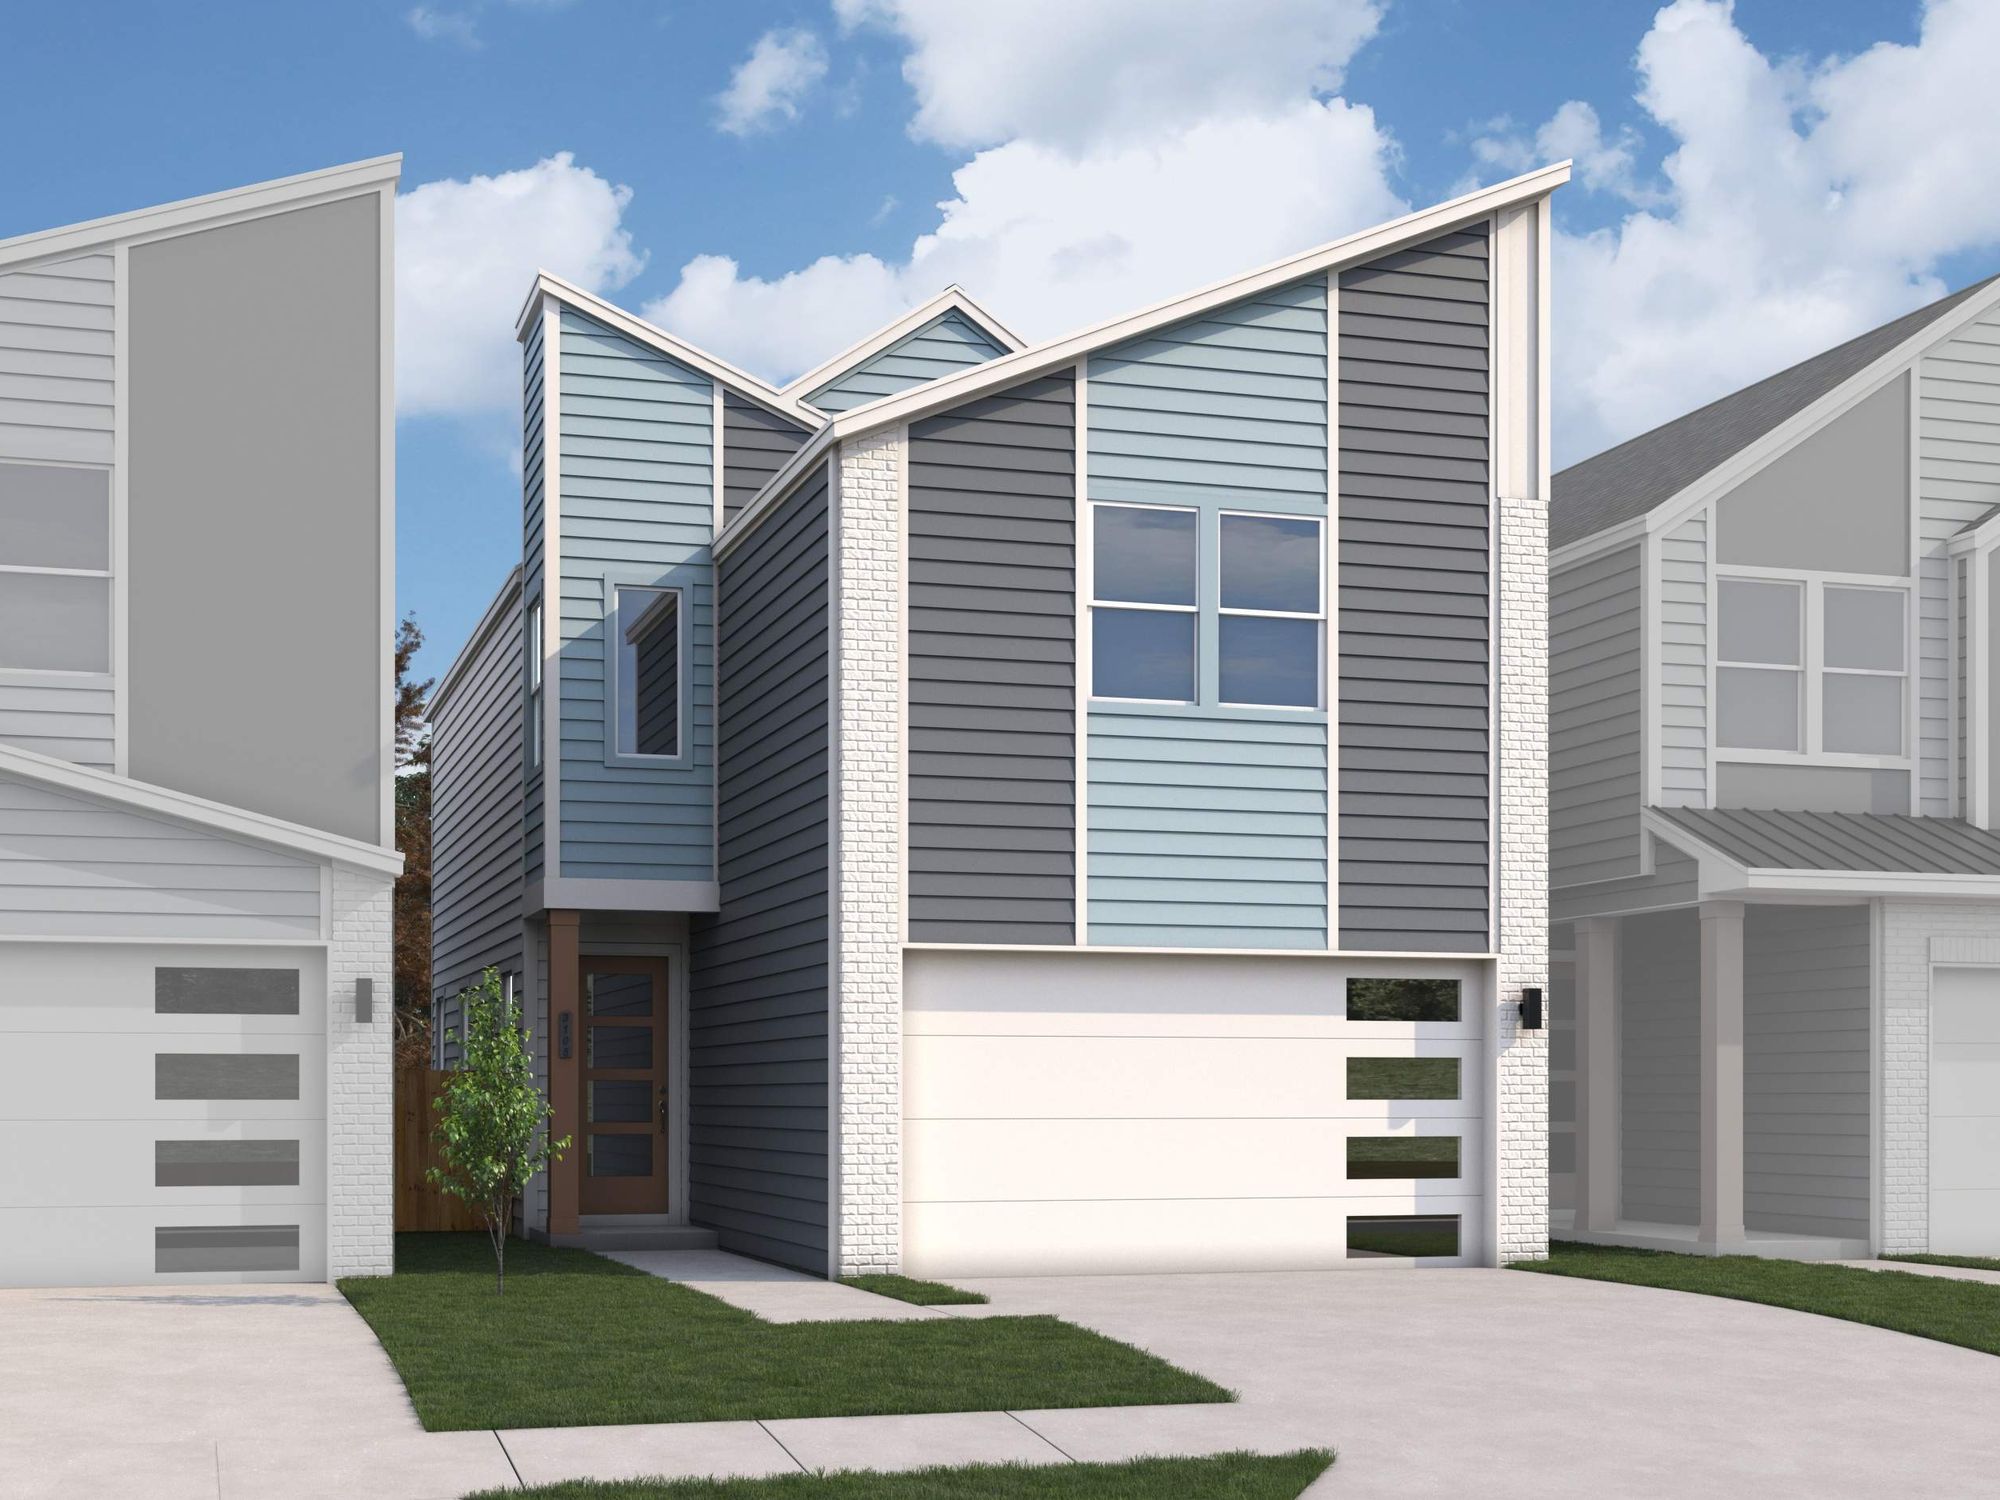 Rendering of the Van Gogh home exterior, part of the new Alicante home community.